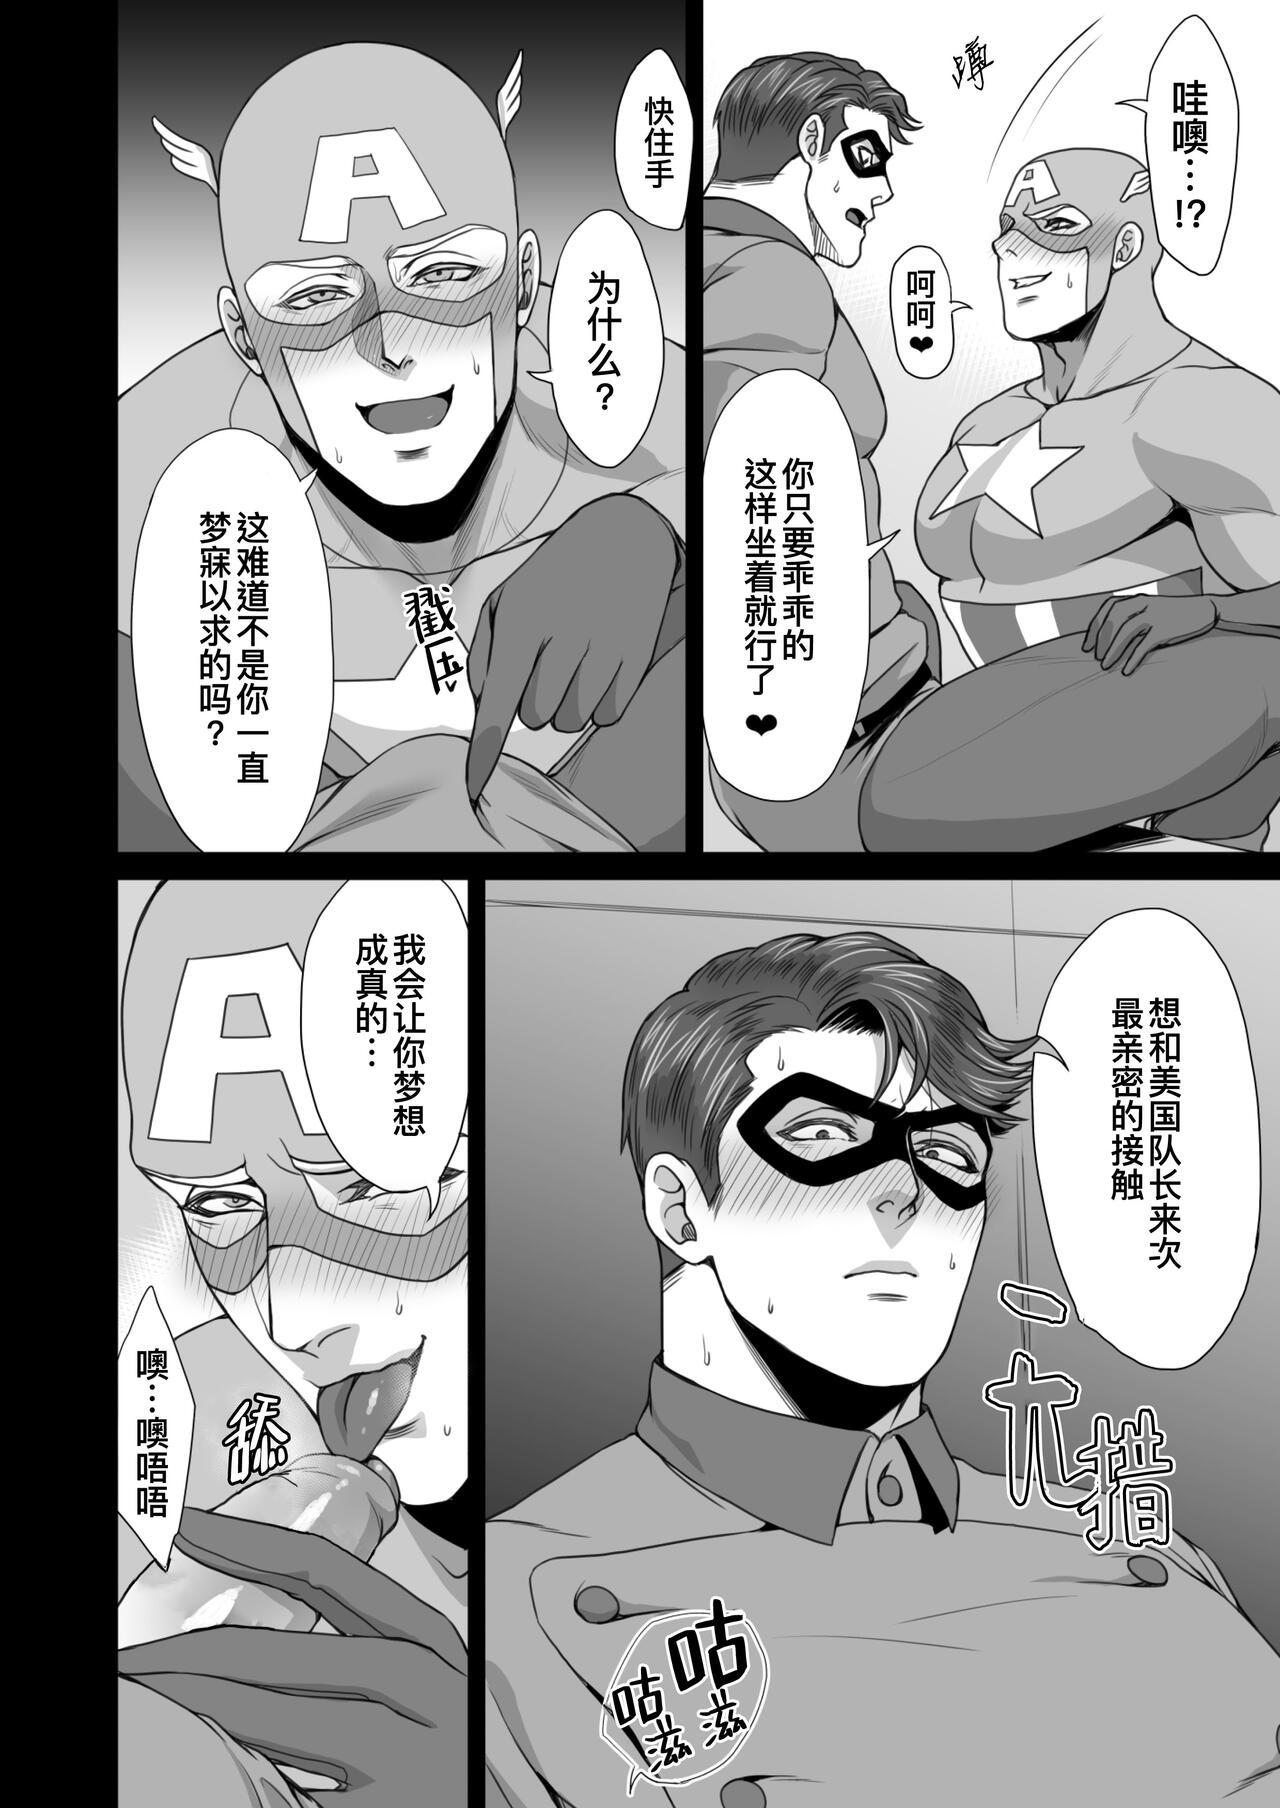 Watersports NO HEROES Our love and hate relationship | 不再需要英雄 - 关于我们之间的爱恨情仇 - Avengers Machine - Page 8